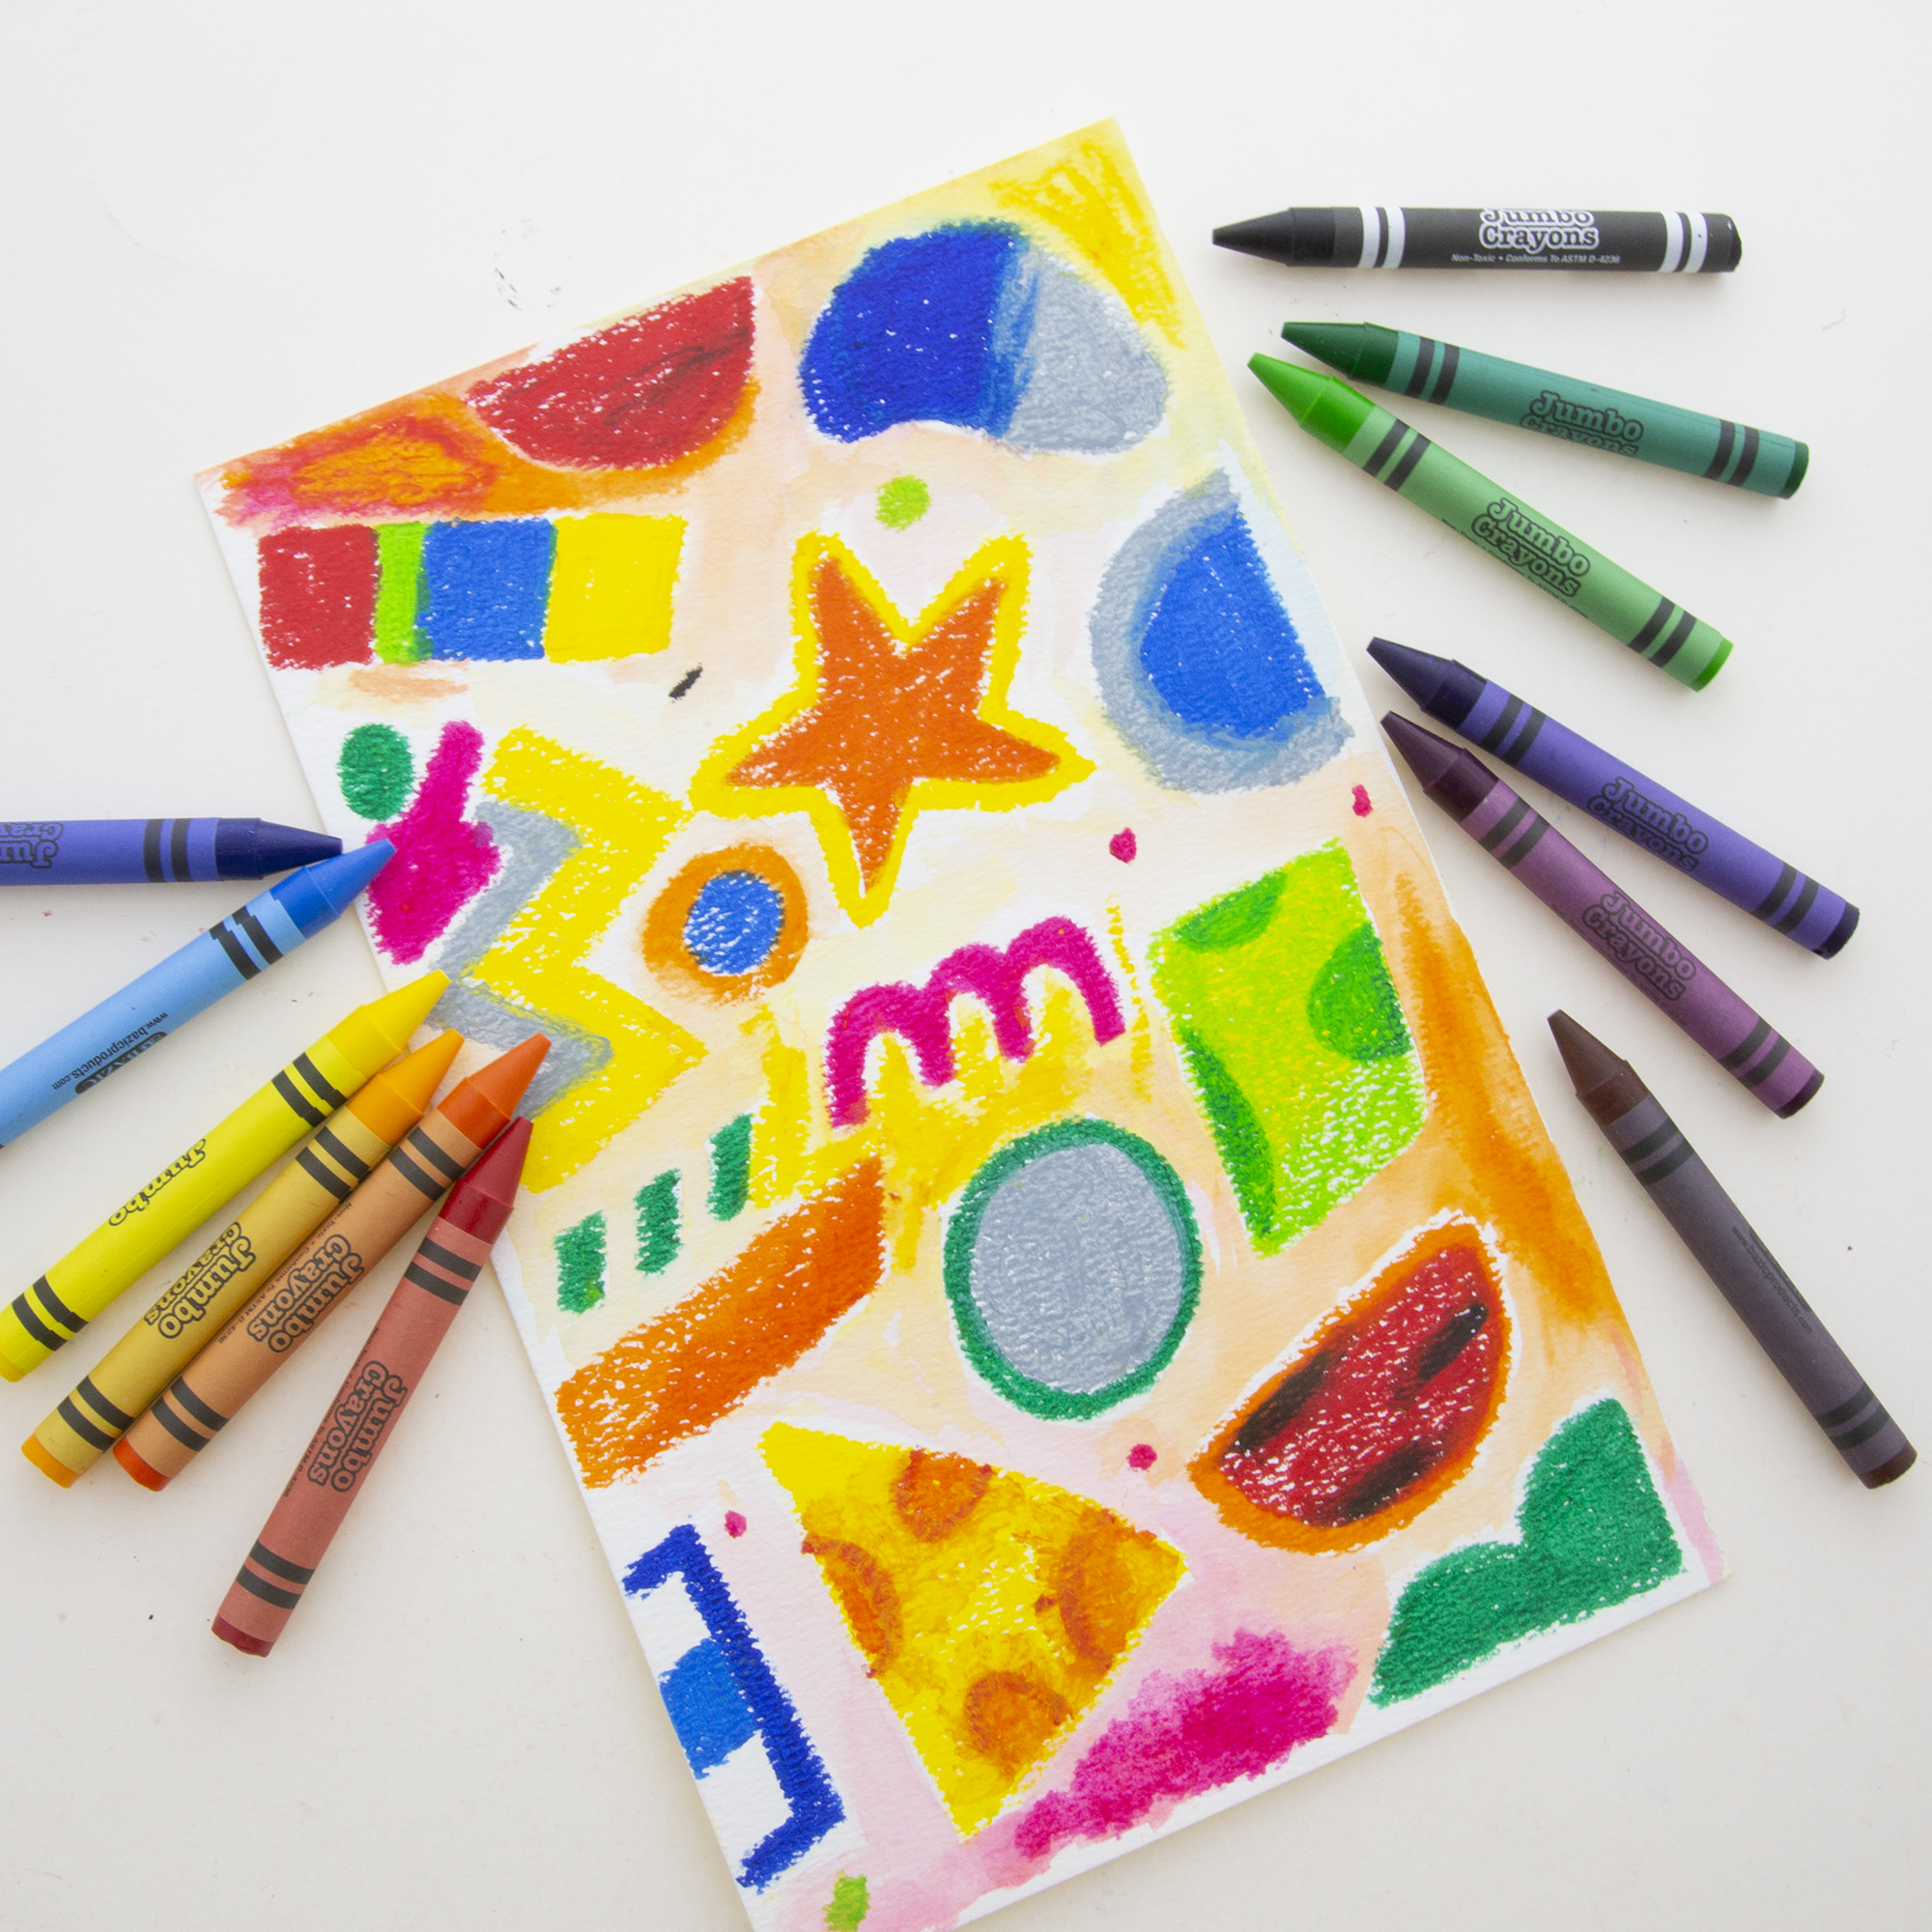 Bazic Jumbo Oil Pastel 12 Colors for ages 3+